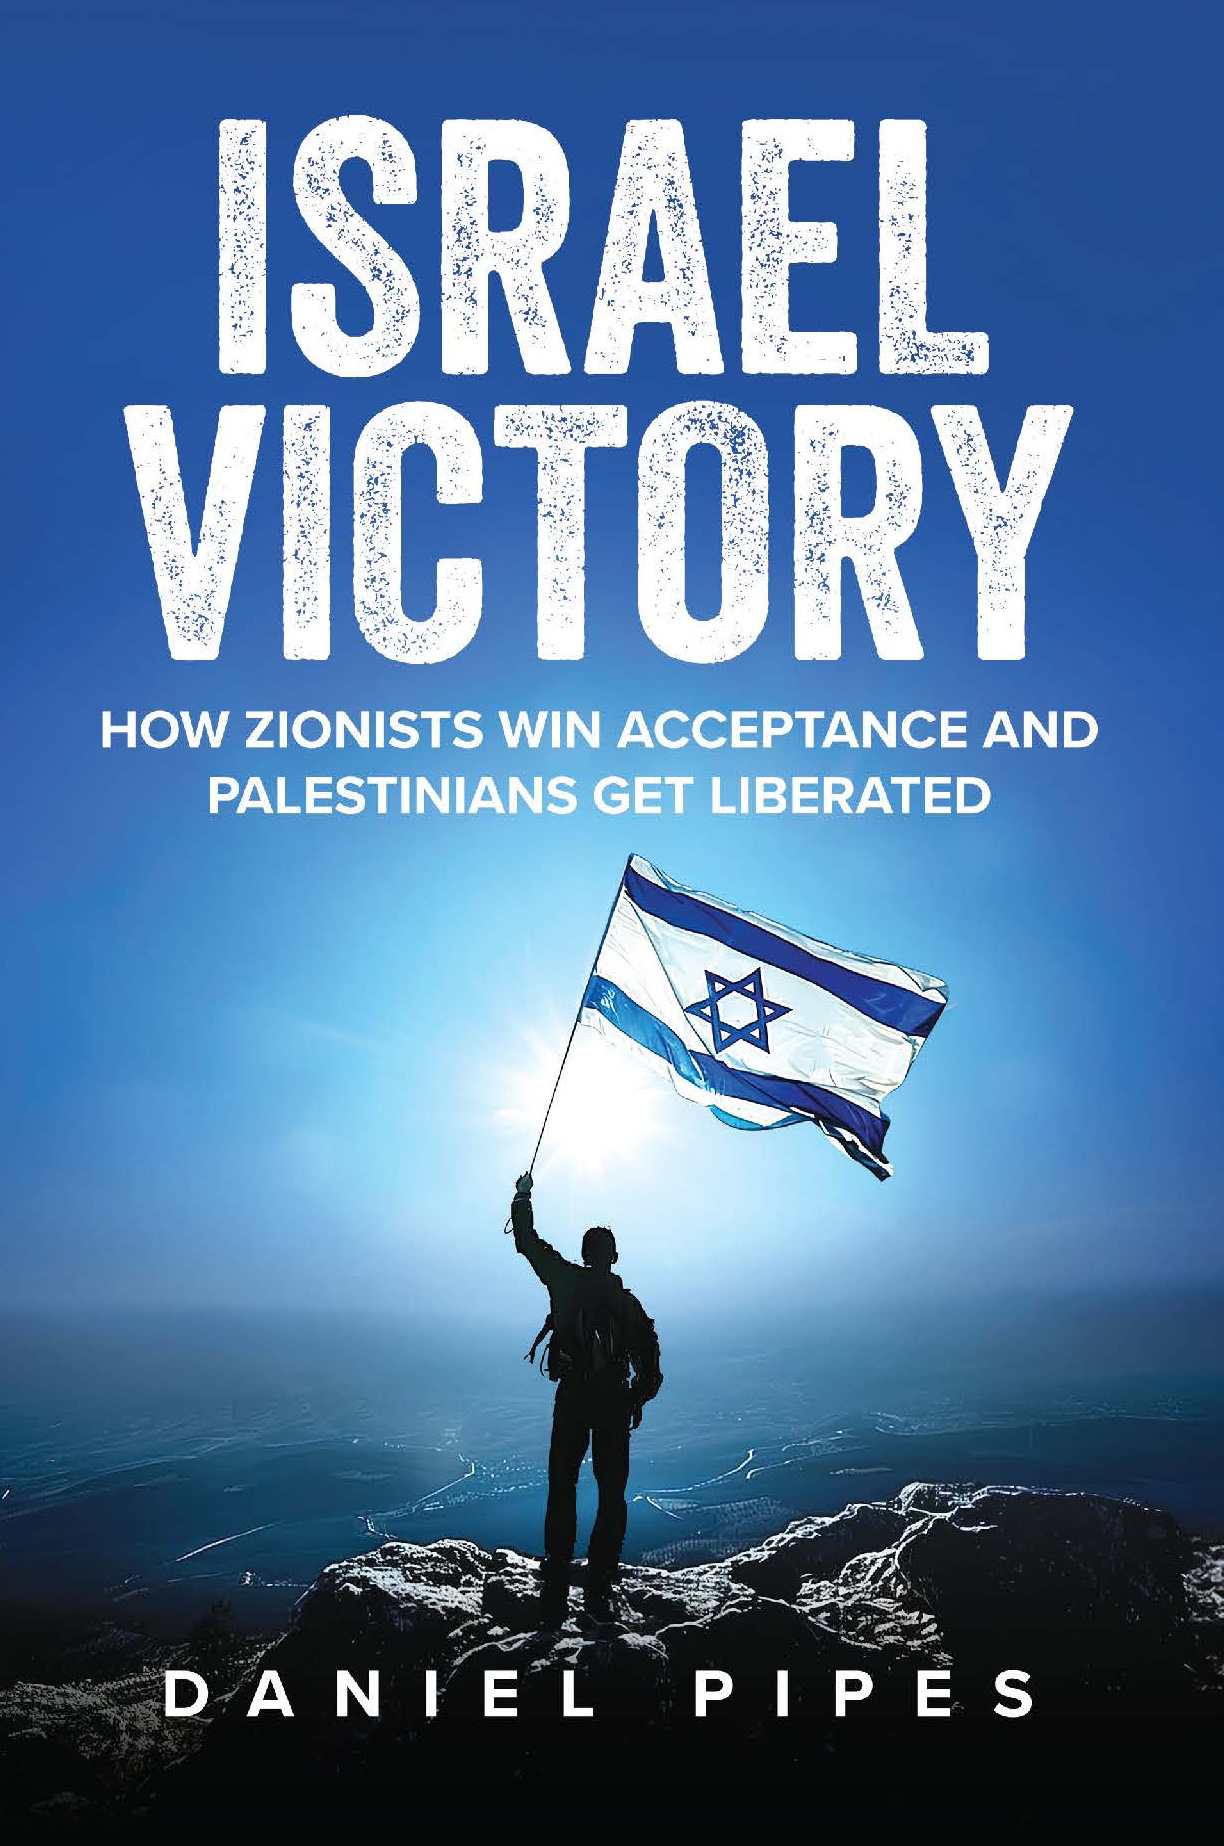 Announcing the Publication of Israel Victory: How Zionists Win Acceptance and Palestinians Get Liberated